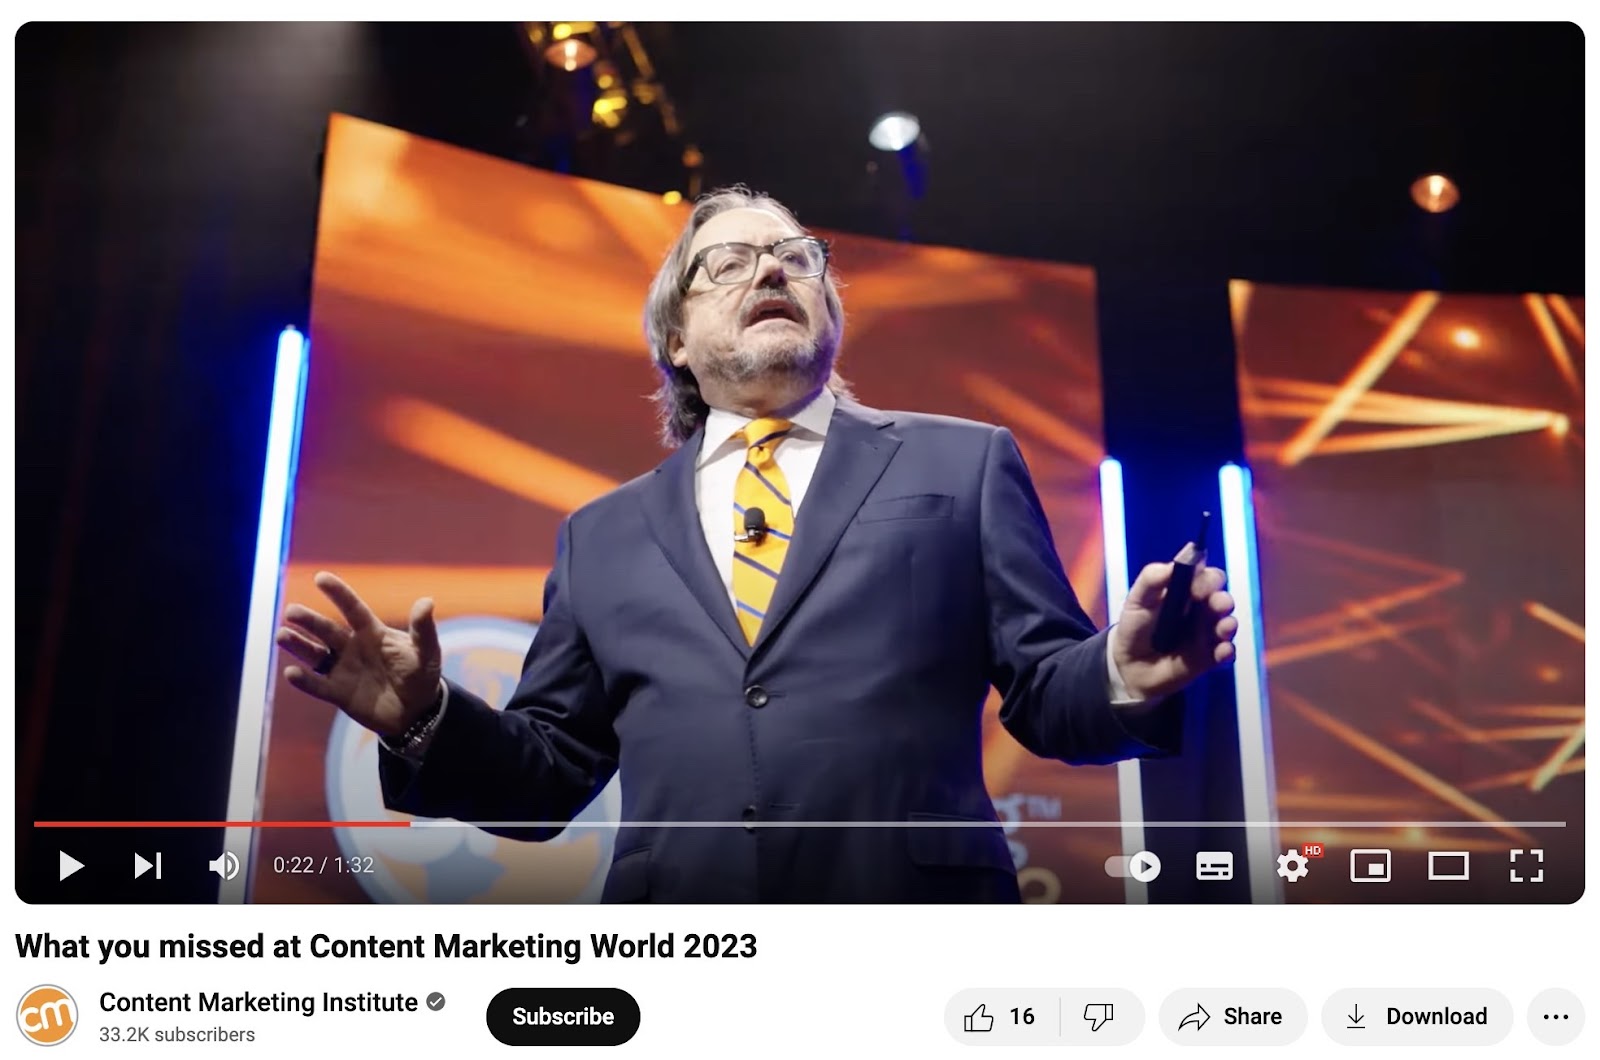 Content Marketing World's video on what users who were unable to attend missed